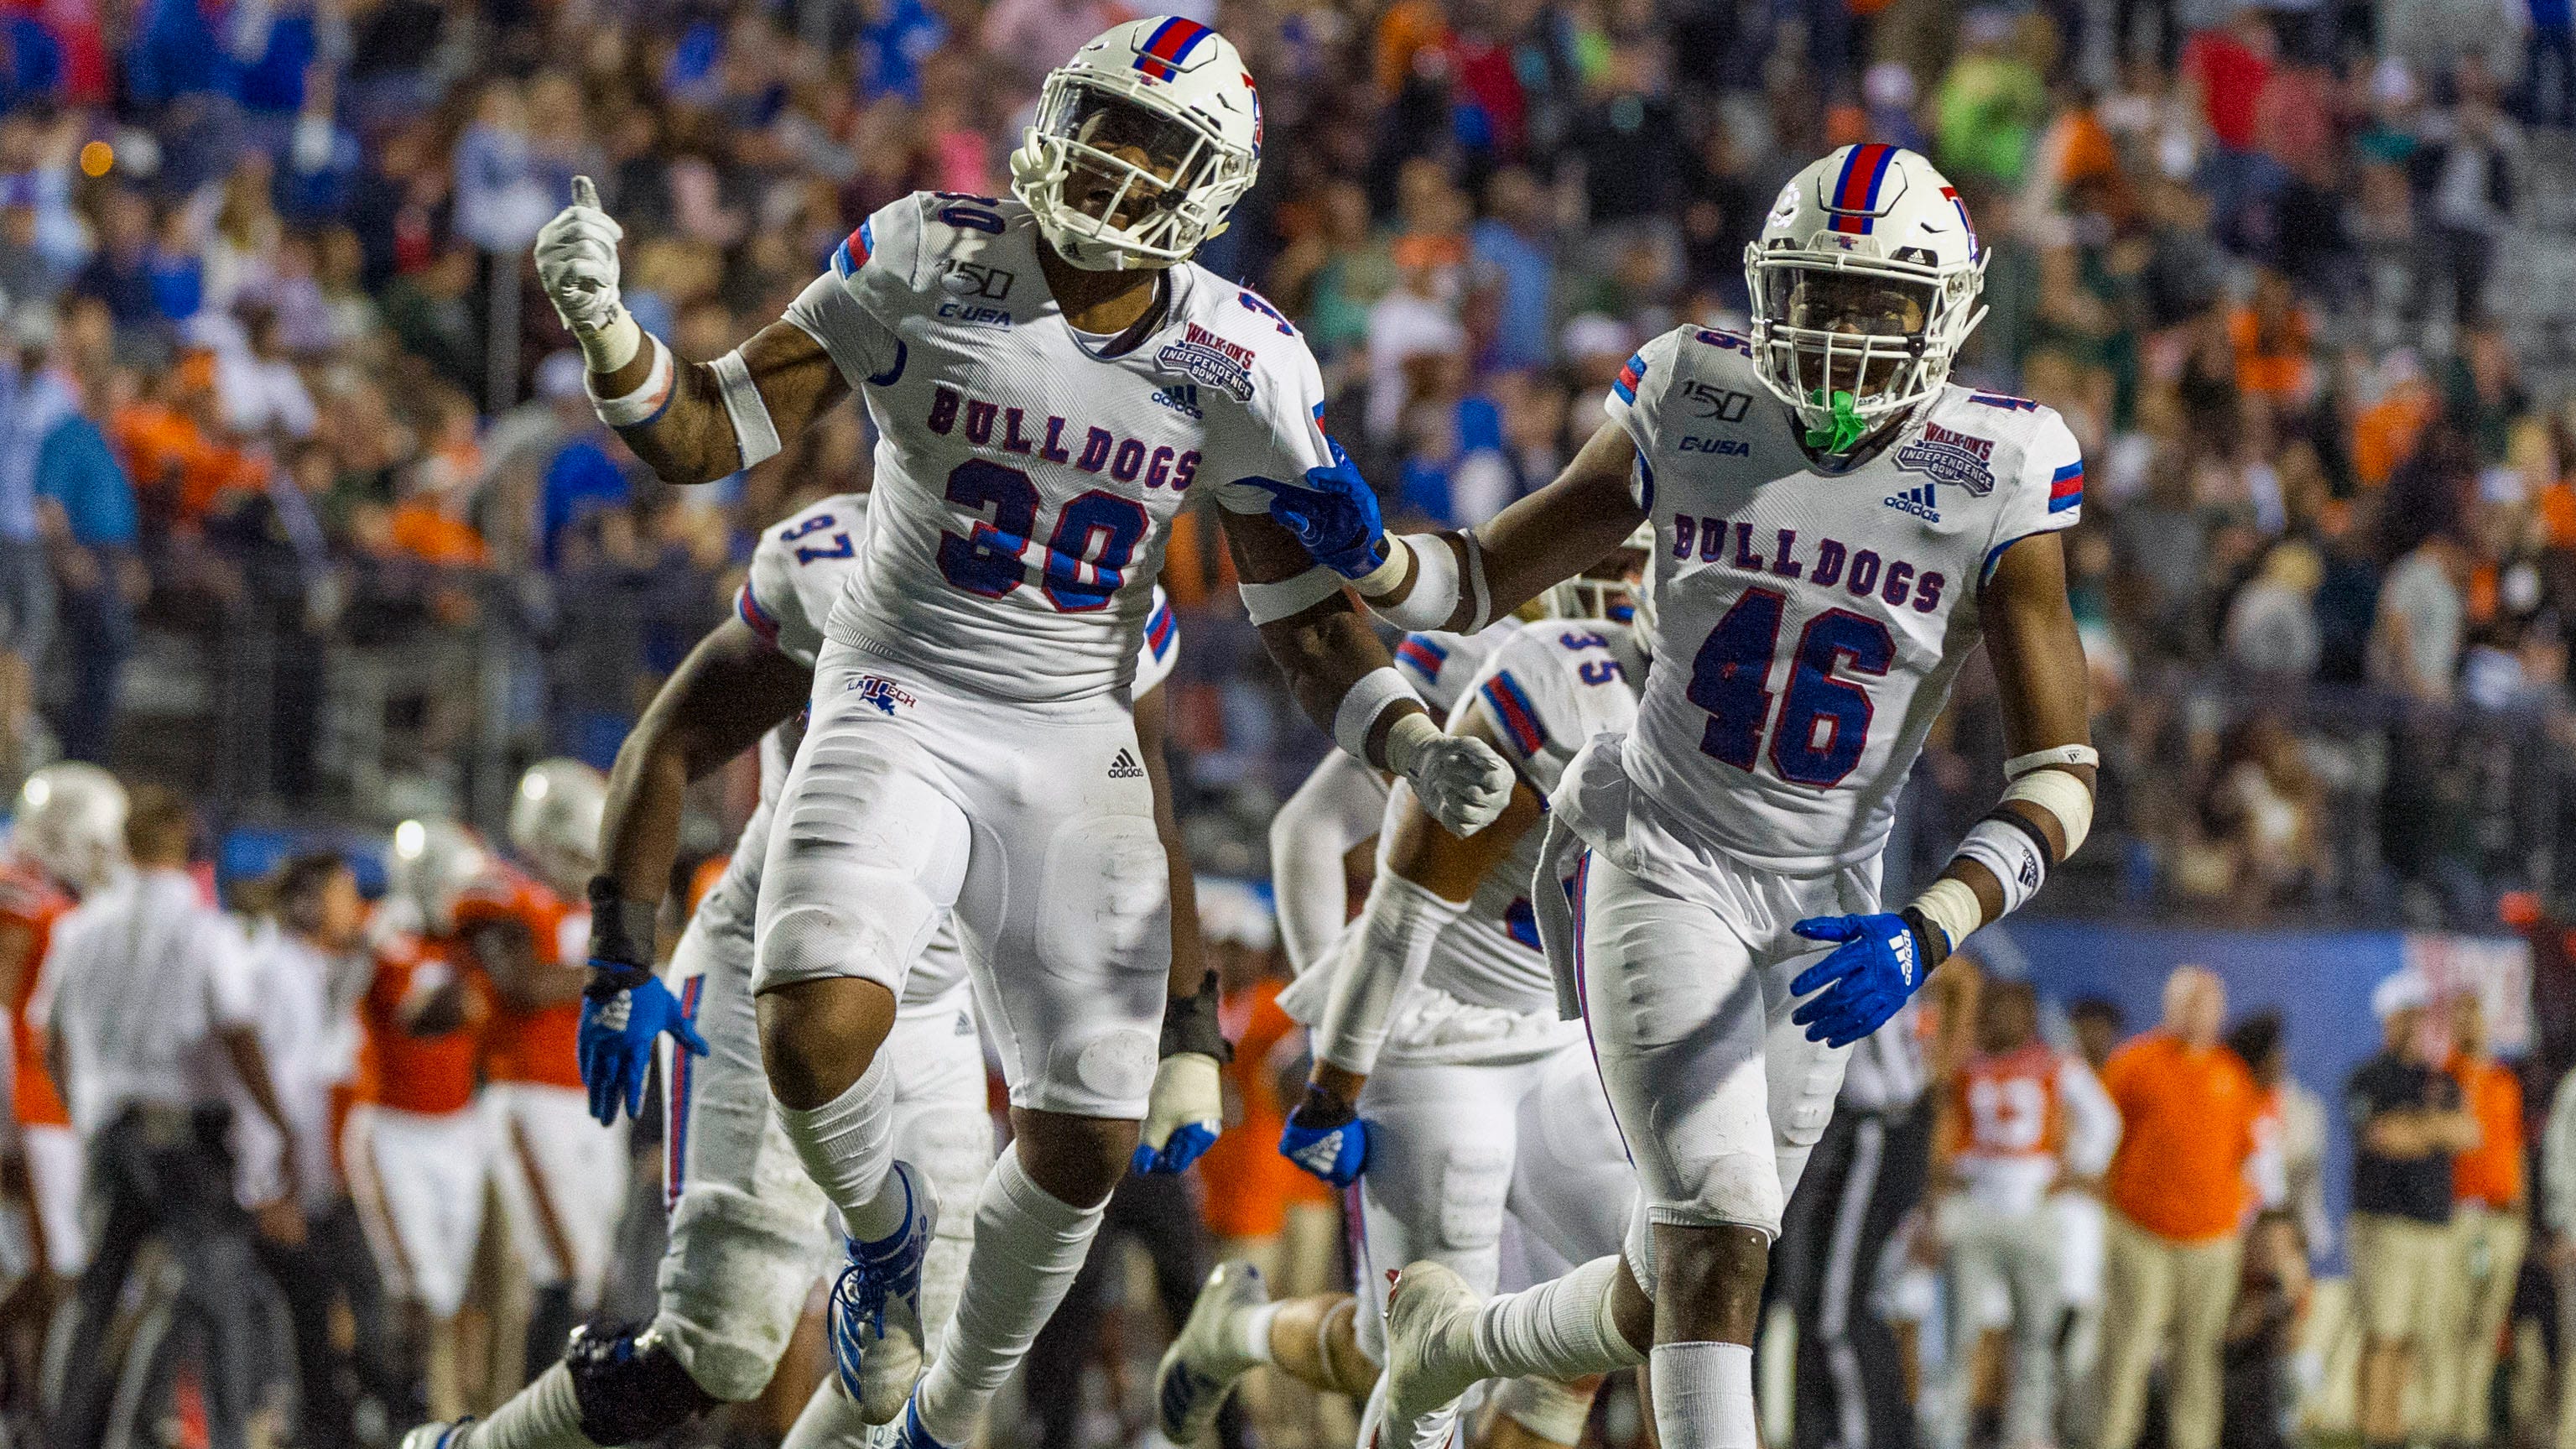 Miami blanked by Louisiana Tech in only shutout in Independence Bowl's...